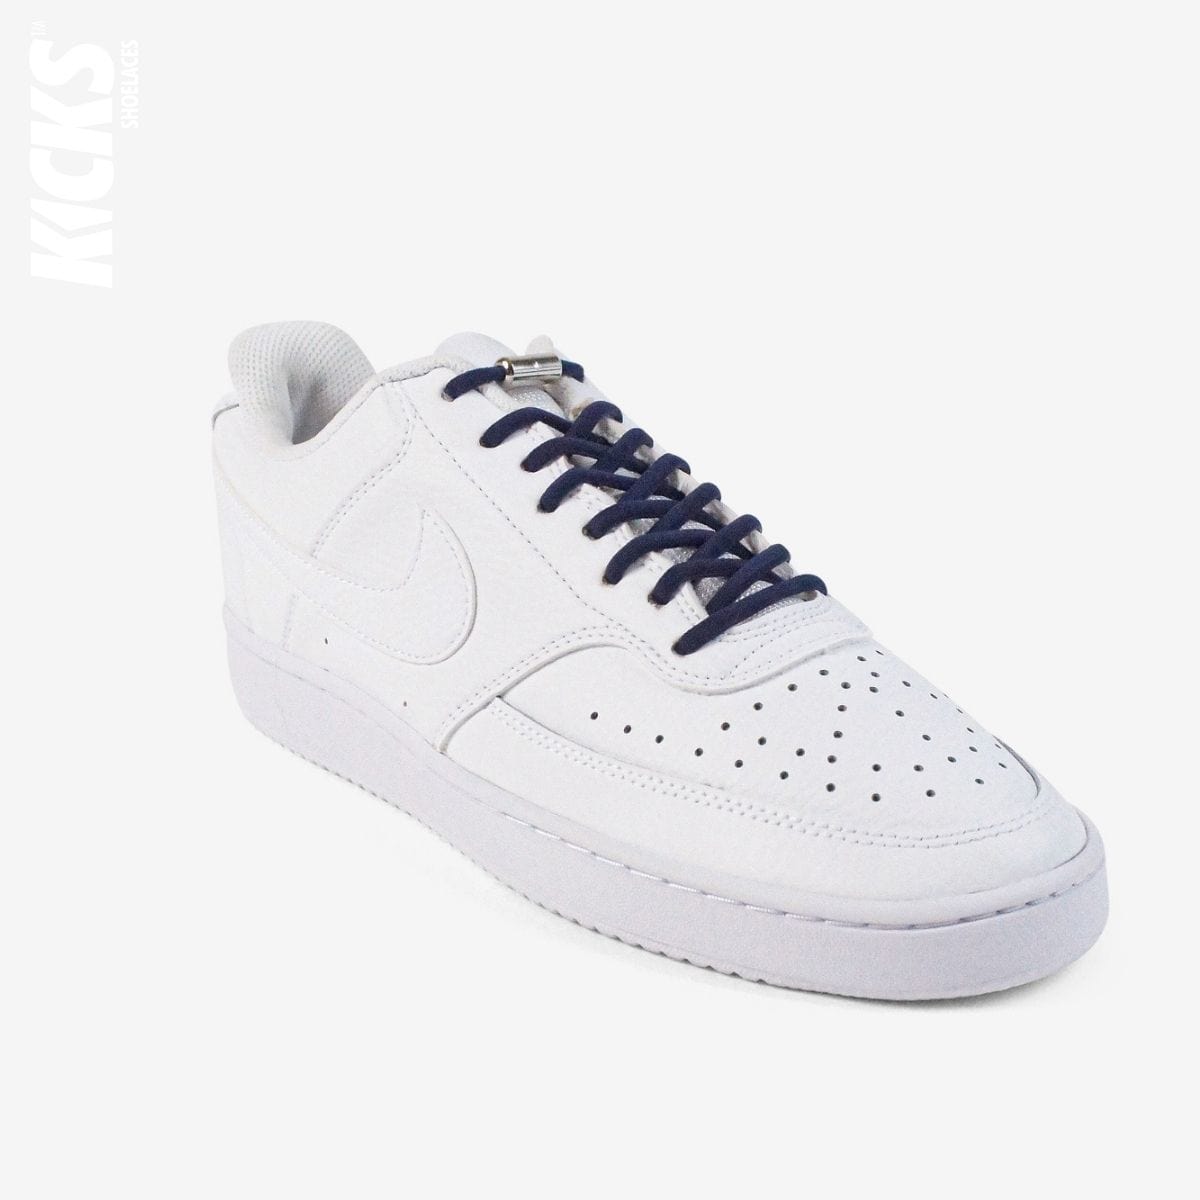 round-no-tie-shoelaces-with-dark-blue-laces-on-nike-white-sneakers-by-kicks-shoelaces